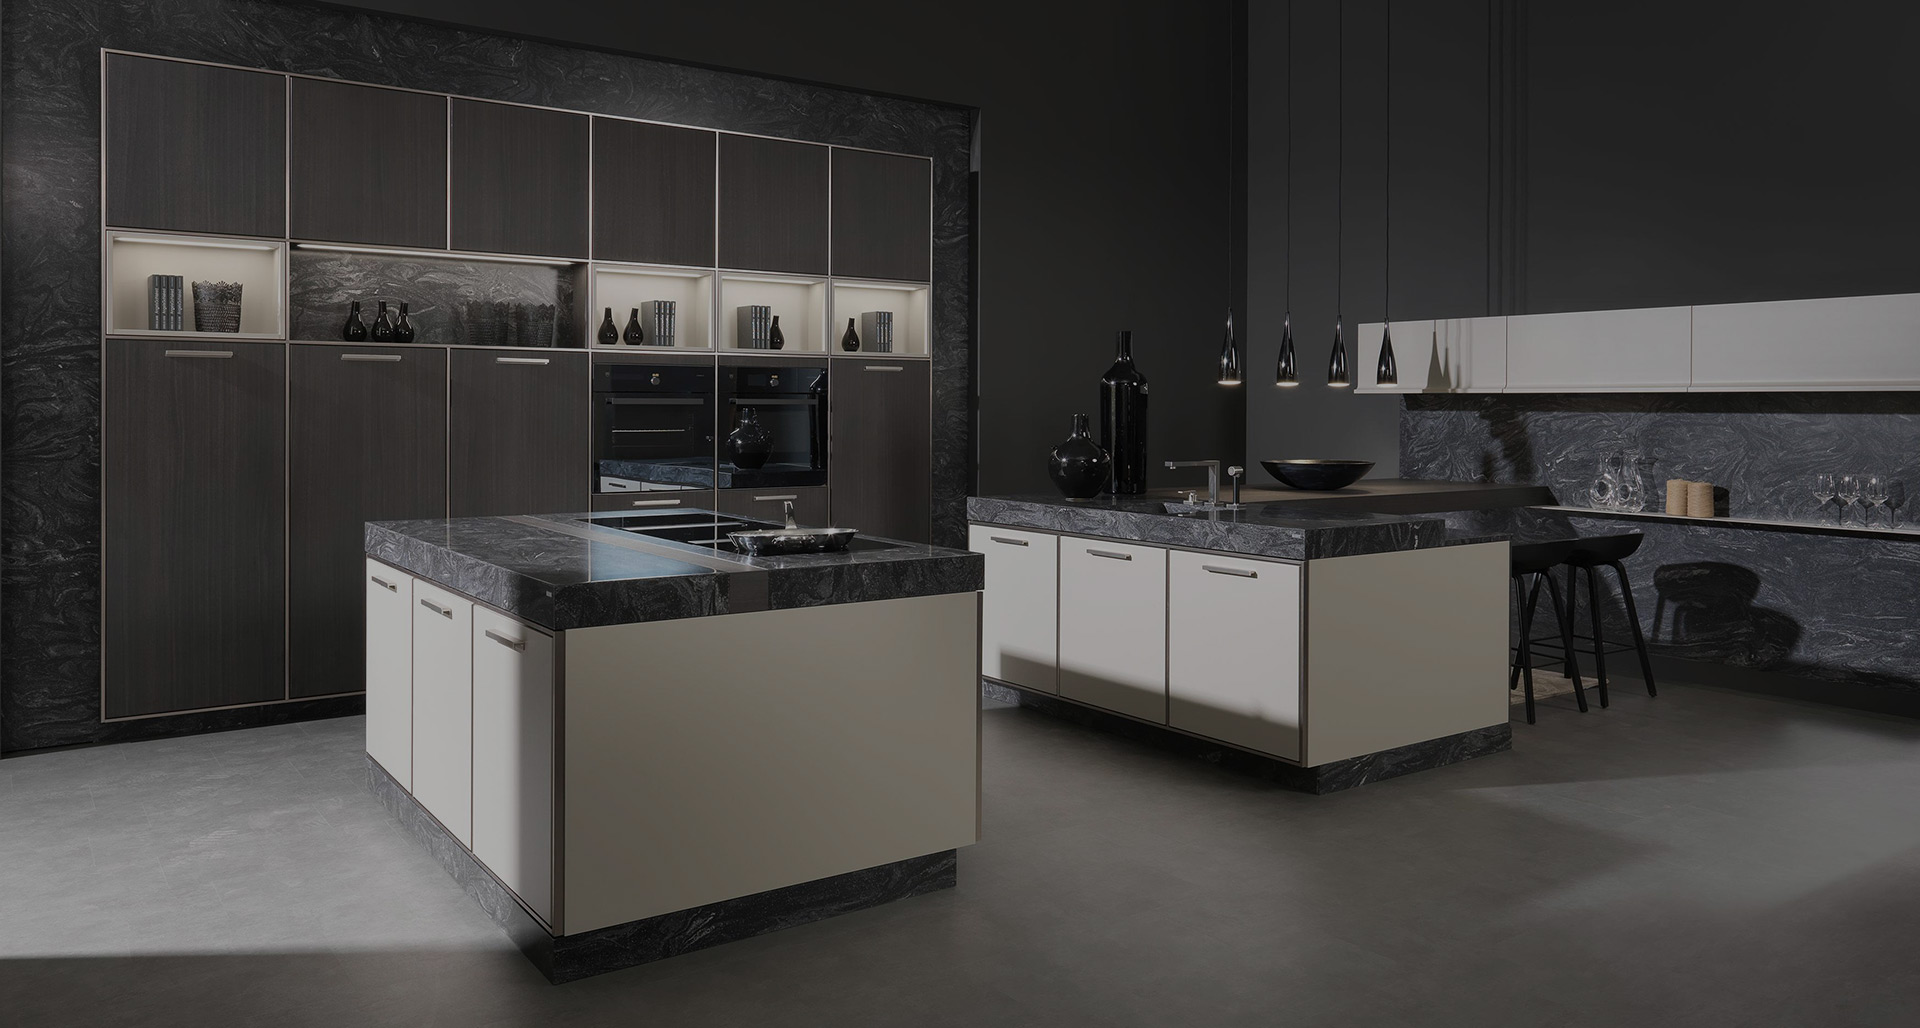 Elegant design of high quality Italian kitchens. Modern and avant-garde, urban and inspiring or modern and rustic, all over the world, our kitchens reflect the lifestyle and personal life of people